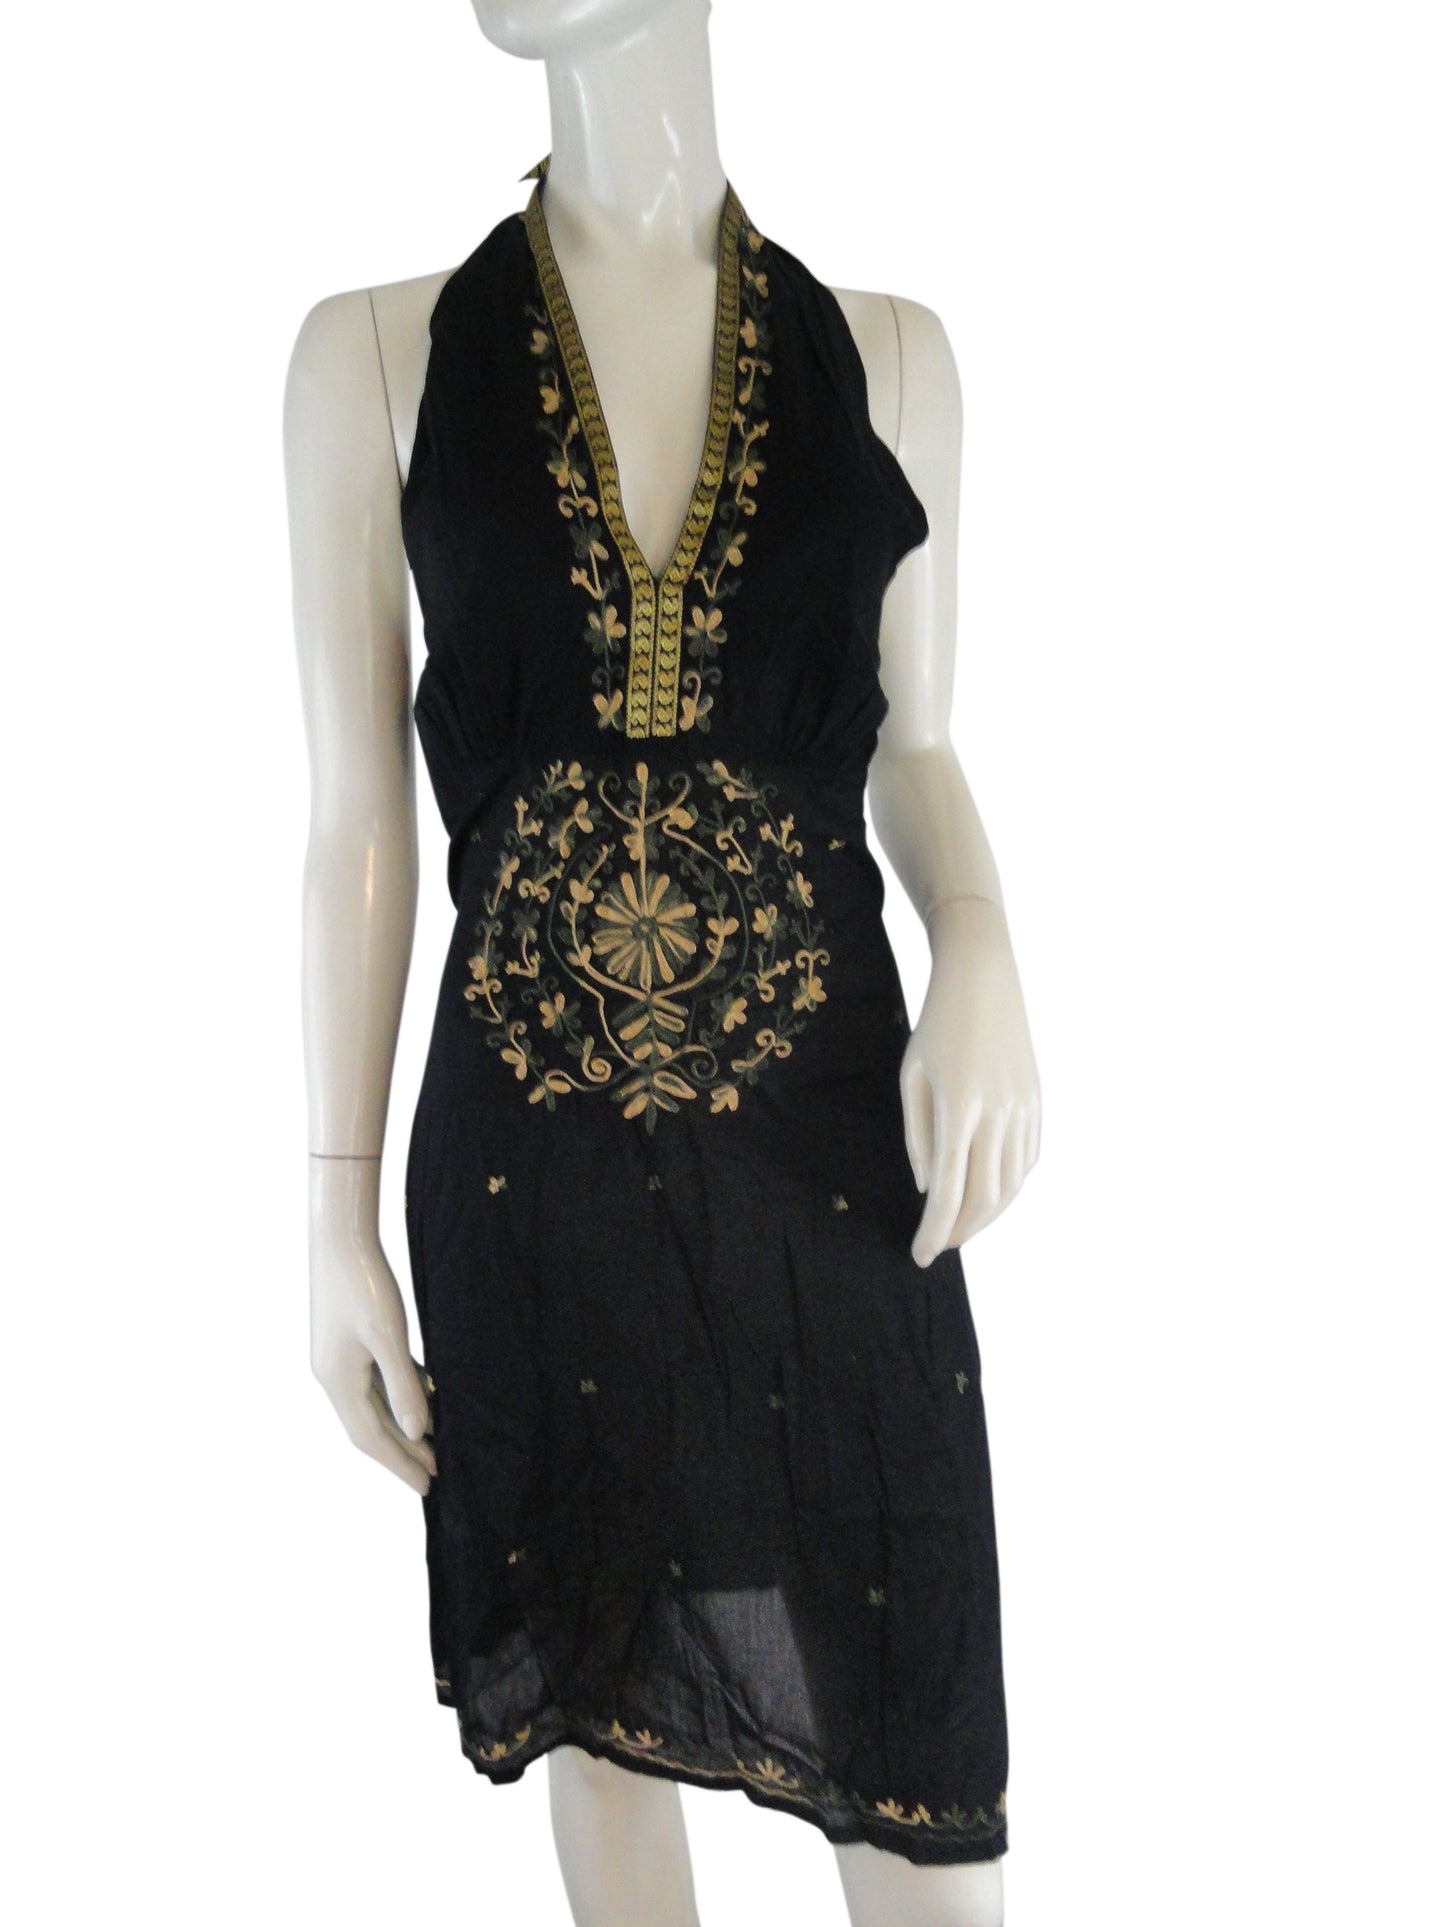 Load image into Gallery viewer, Little Journey Dress Black Embellished Size Small SKU 000071
